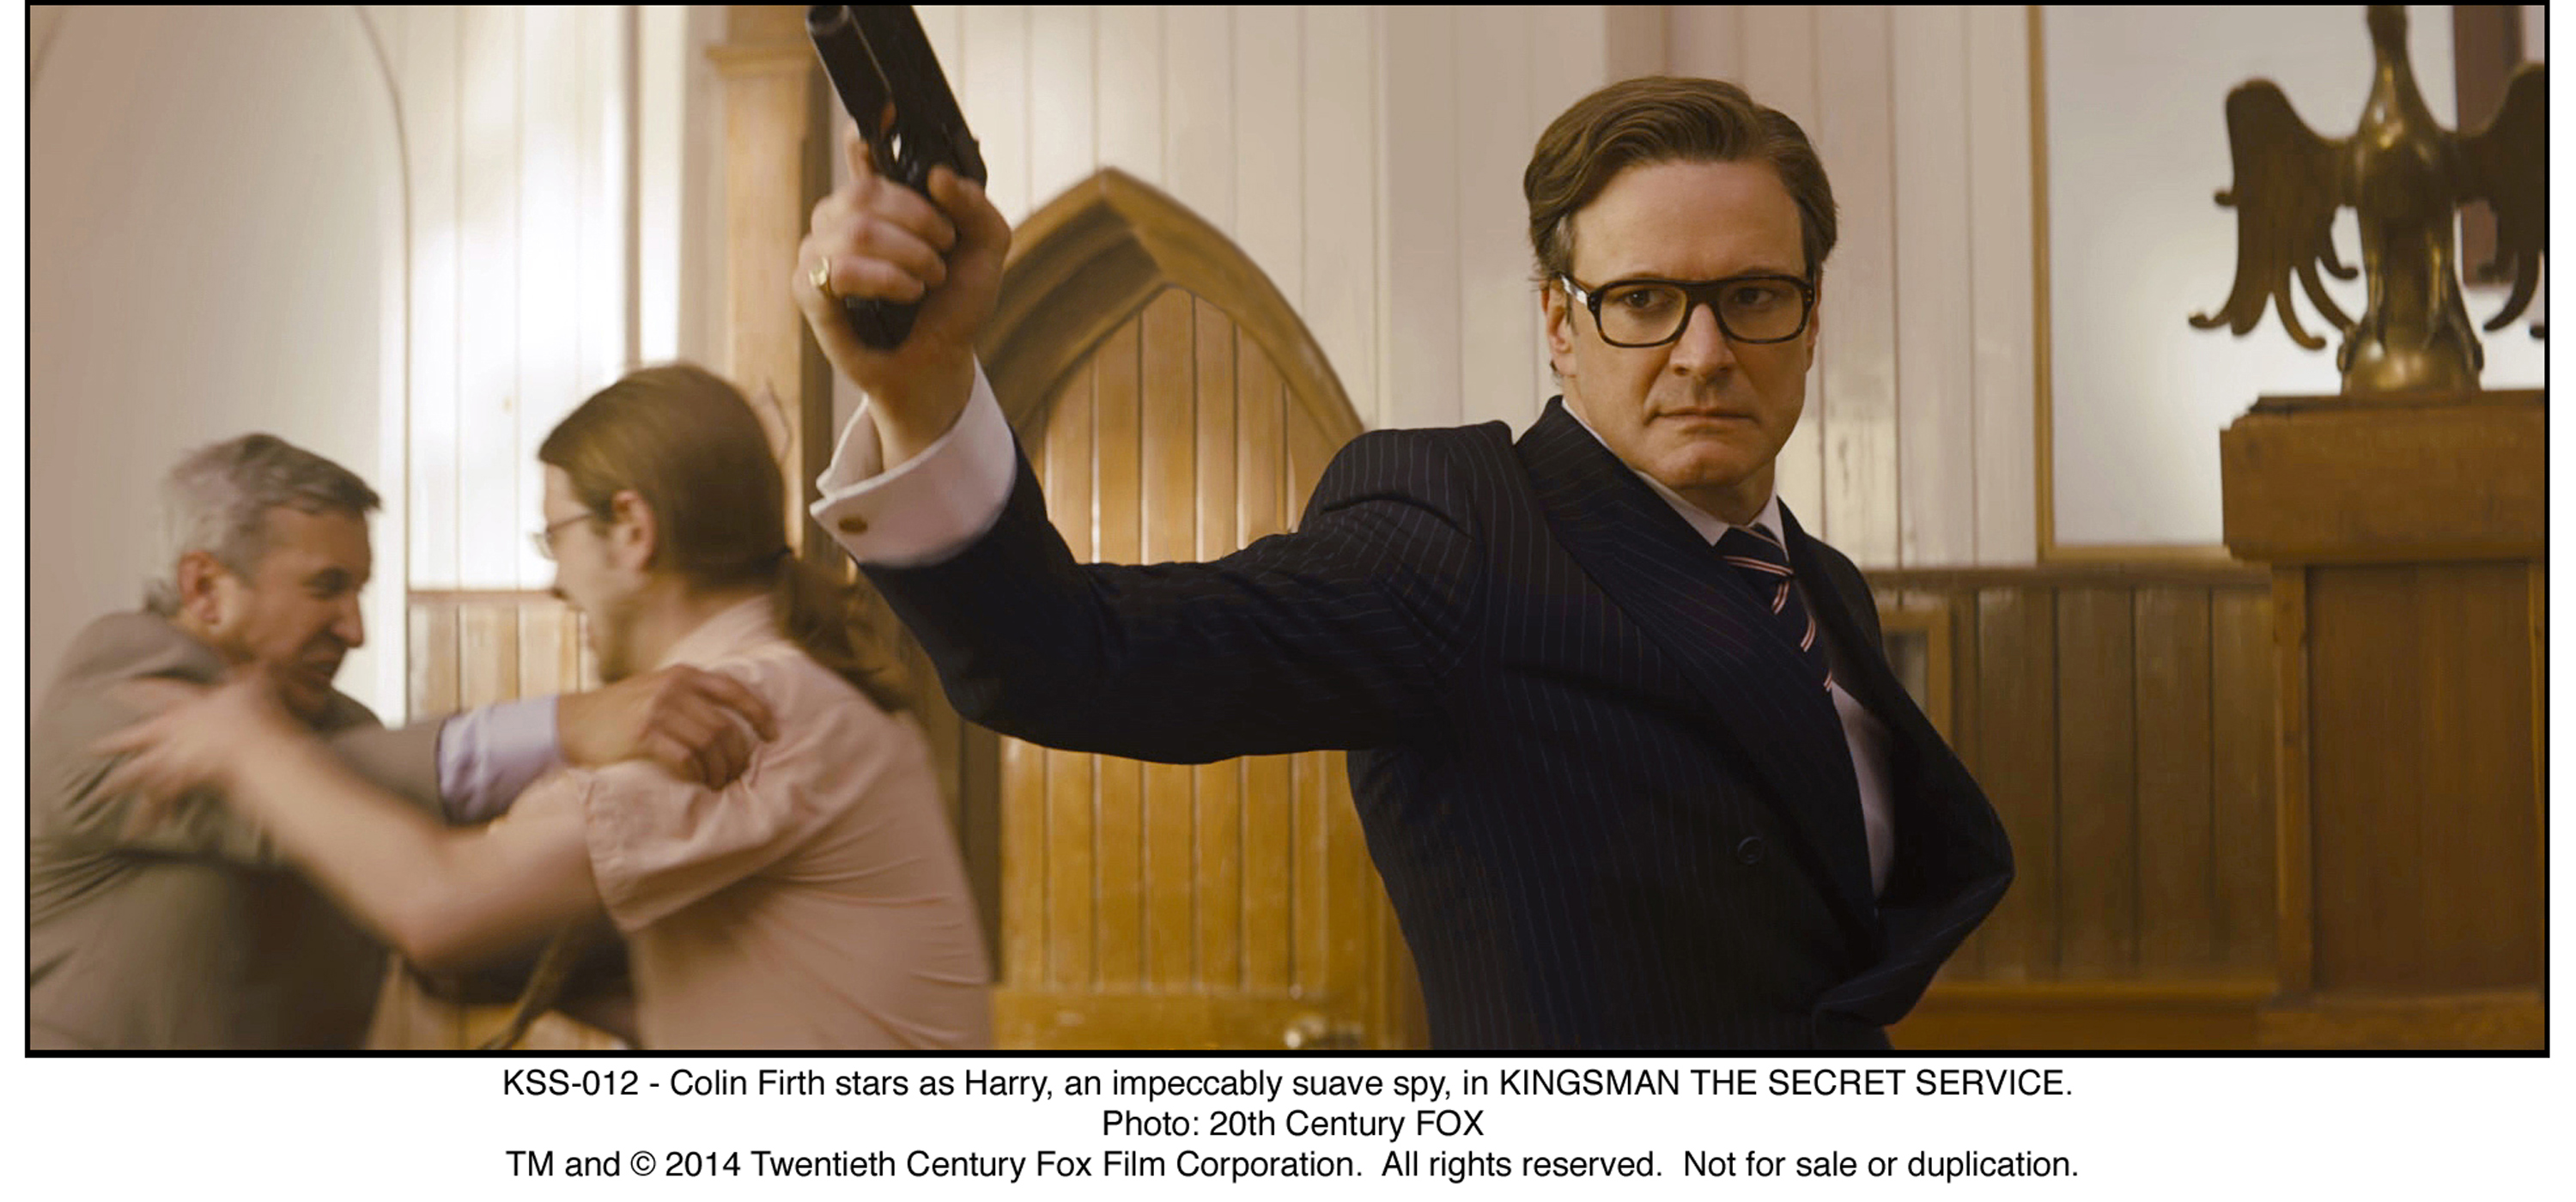 Colin Firth in Kingsman: The Secret Service (2014)